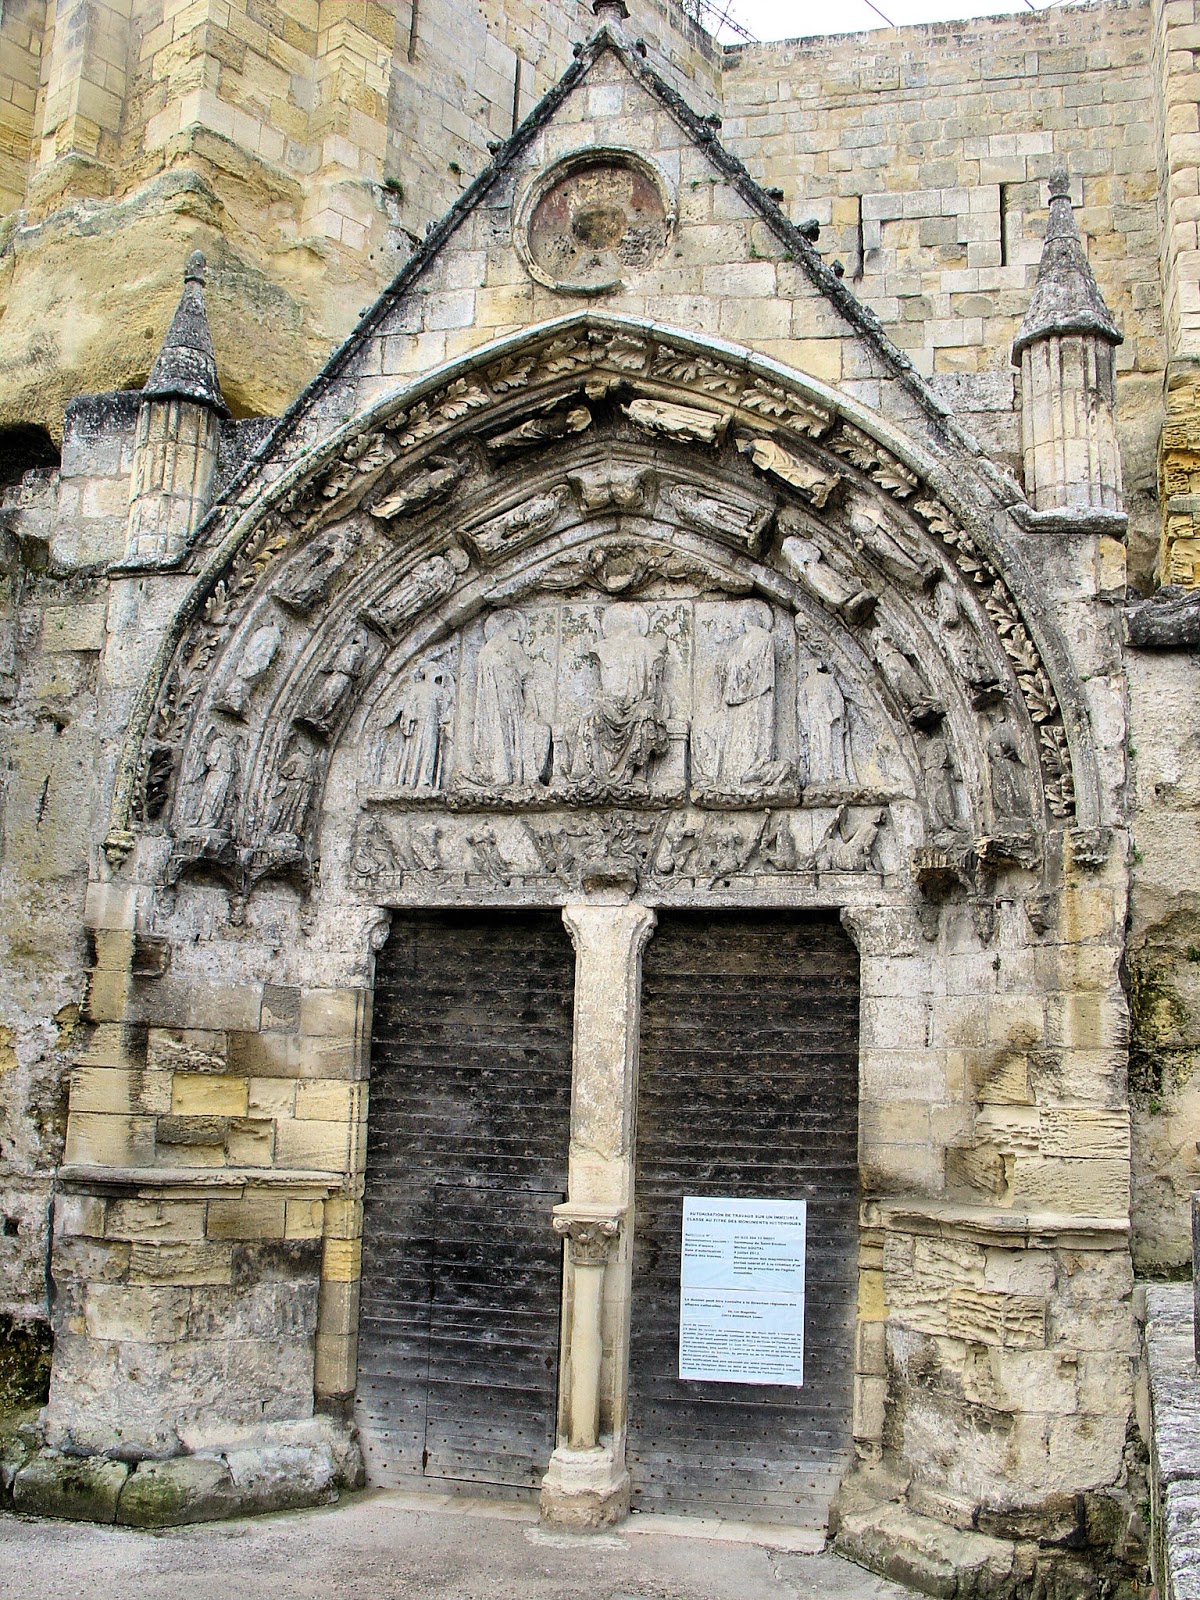 Close-up view of the Monolithic Church's portal.